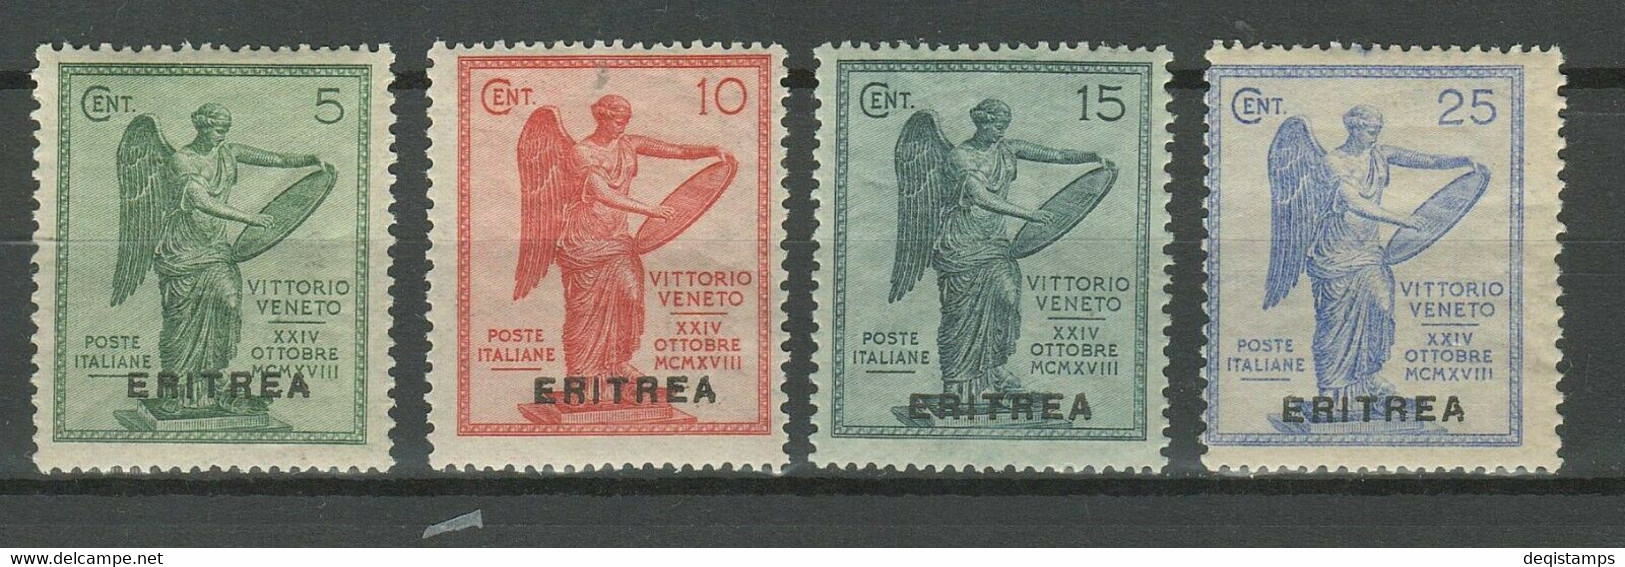 Taly 1922 Eritrea ☀ Early Victory Issue, Full Set ☀ MH* - Eritrée